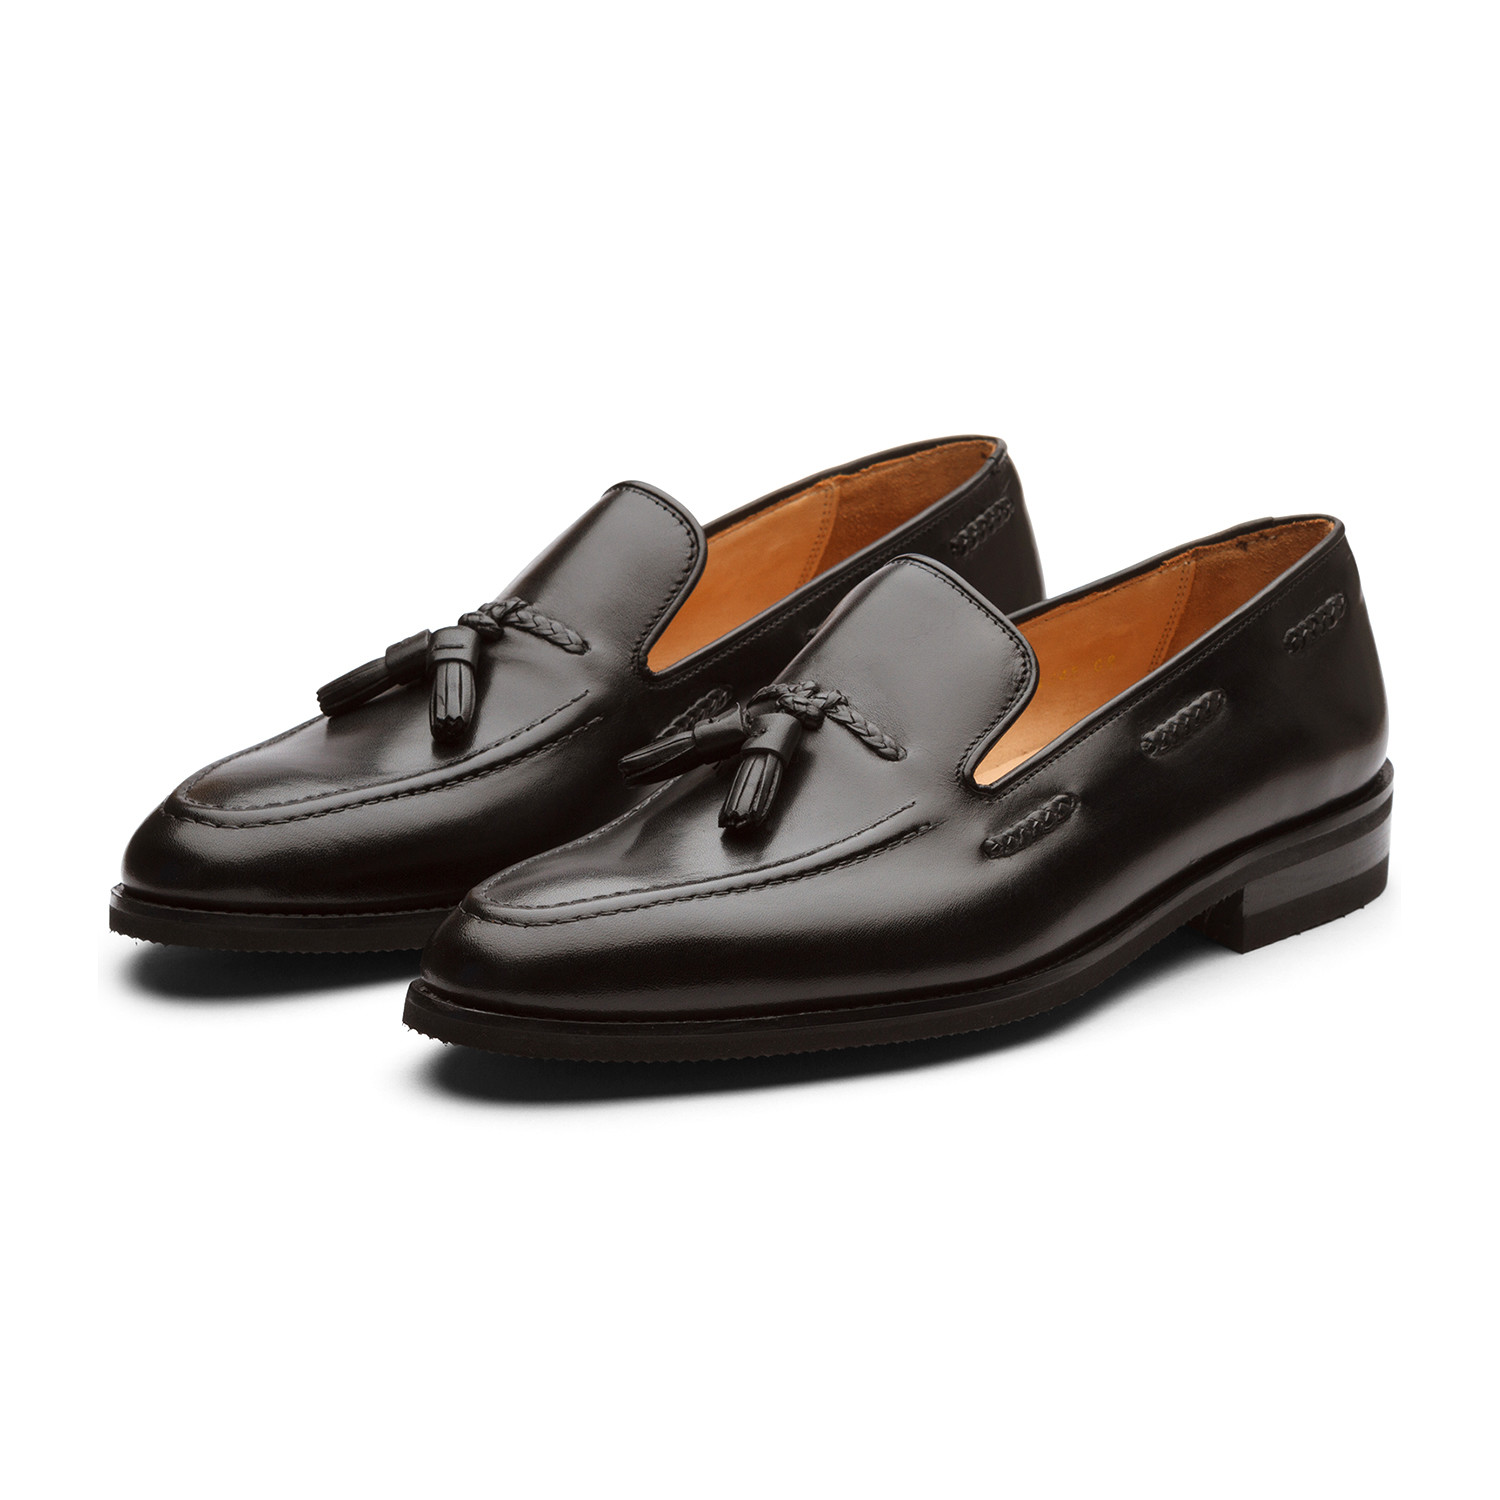 Jax Classic Braided Tassel Loafer Leather Lined Dress Shoes // Black ...